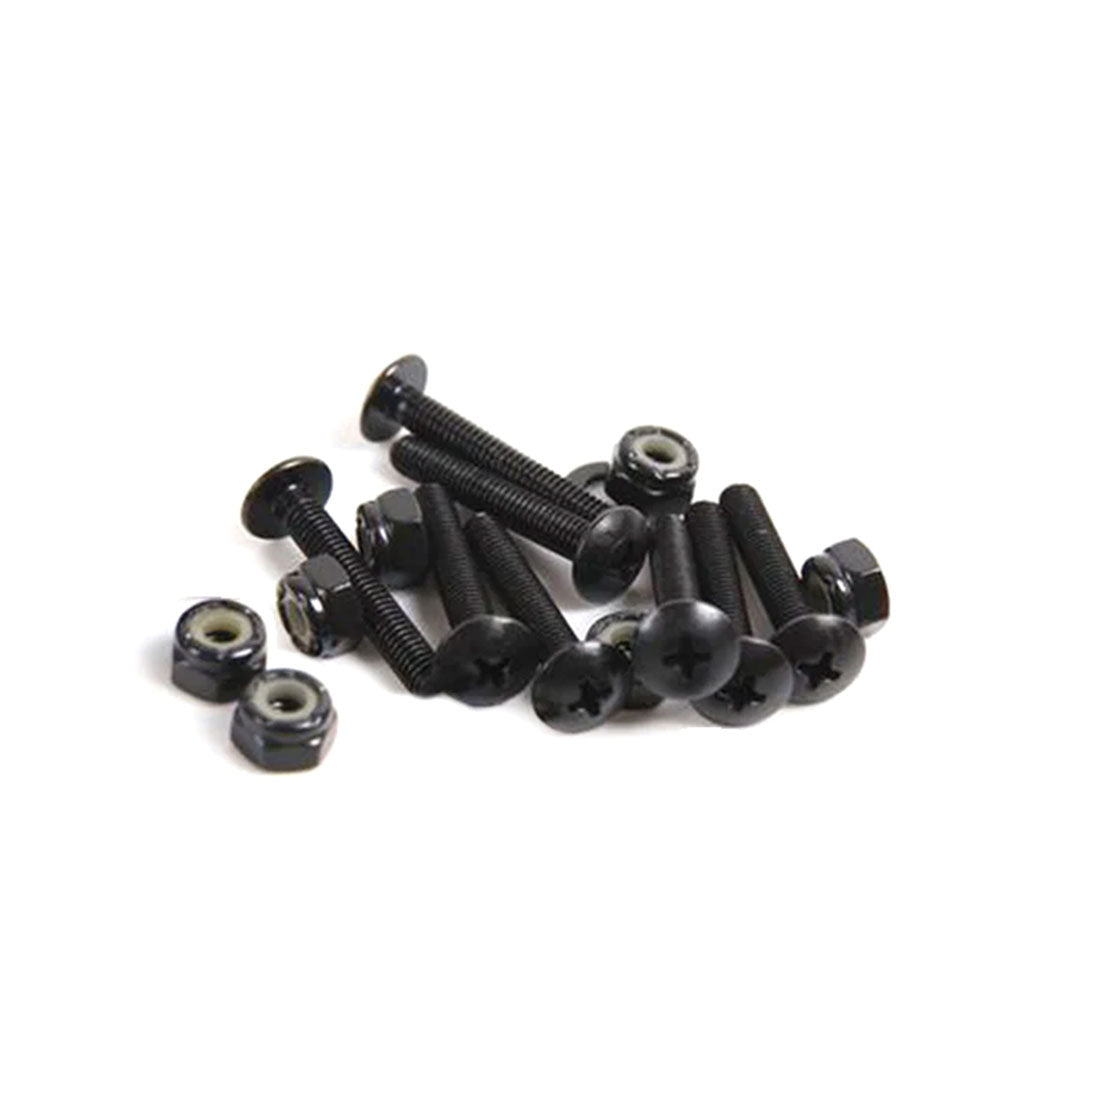 Drifter 1.25 Round Head Phillips Bolts Skateboard Hardware and Parts